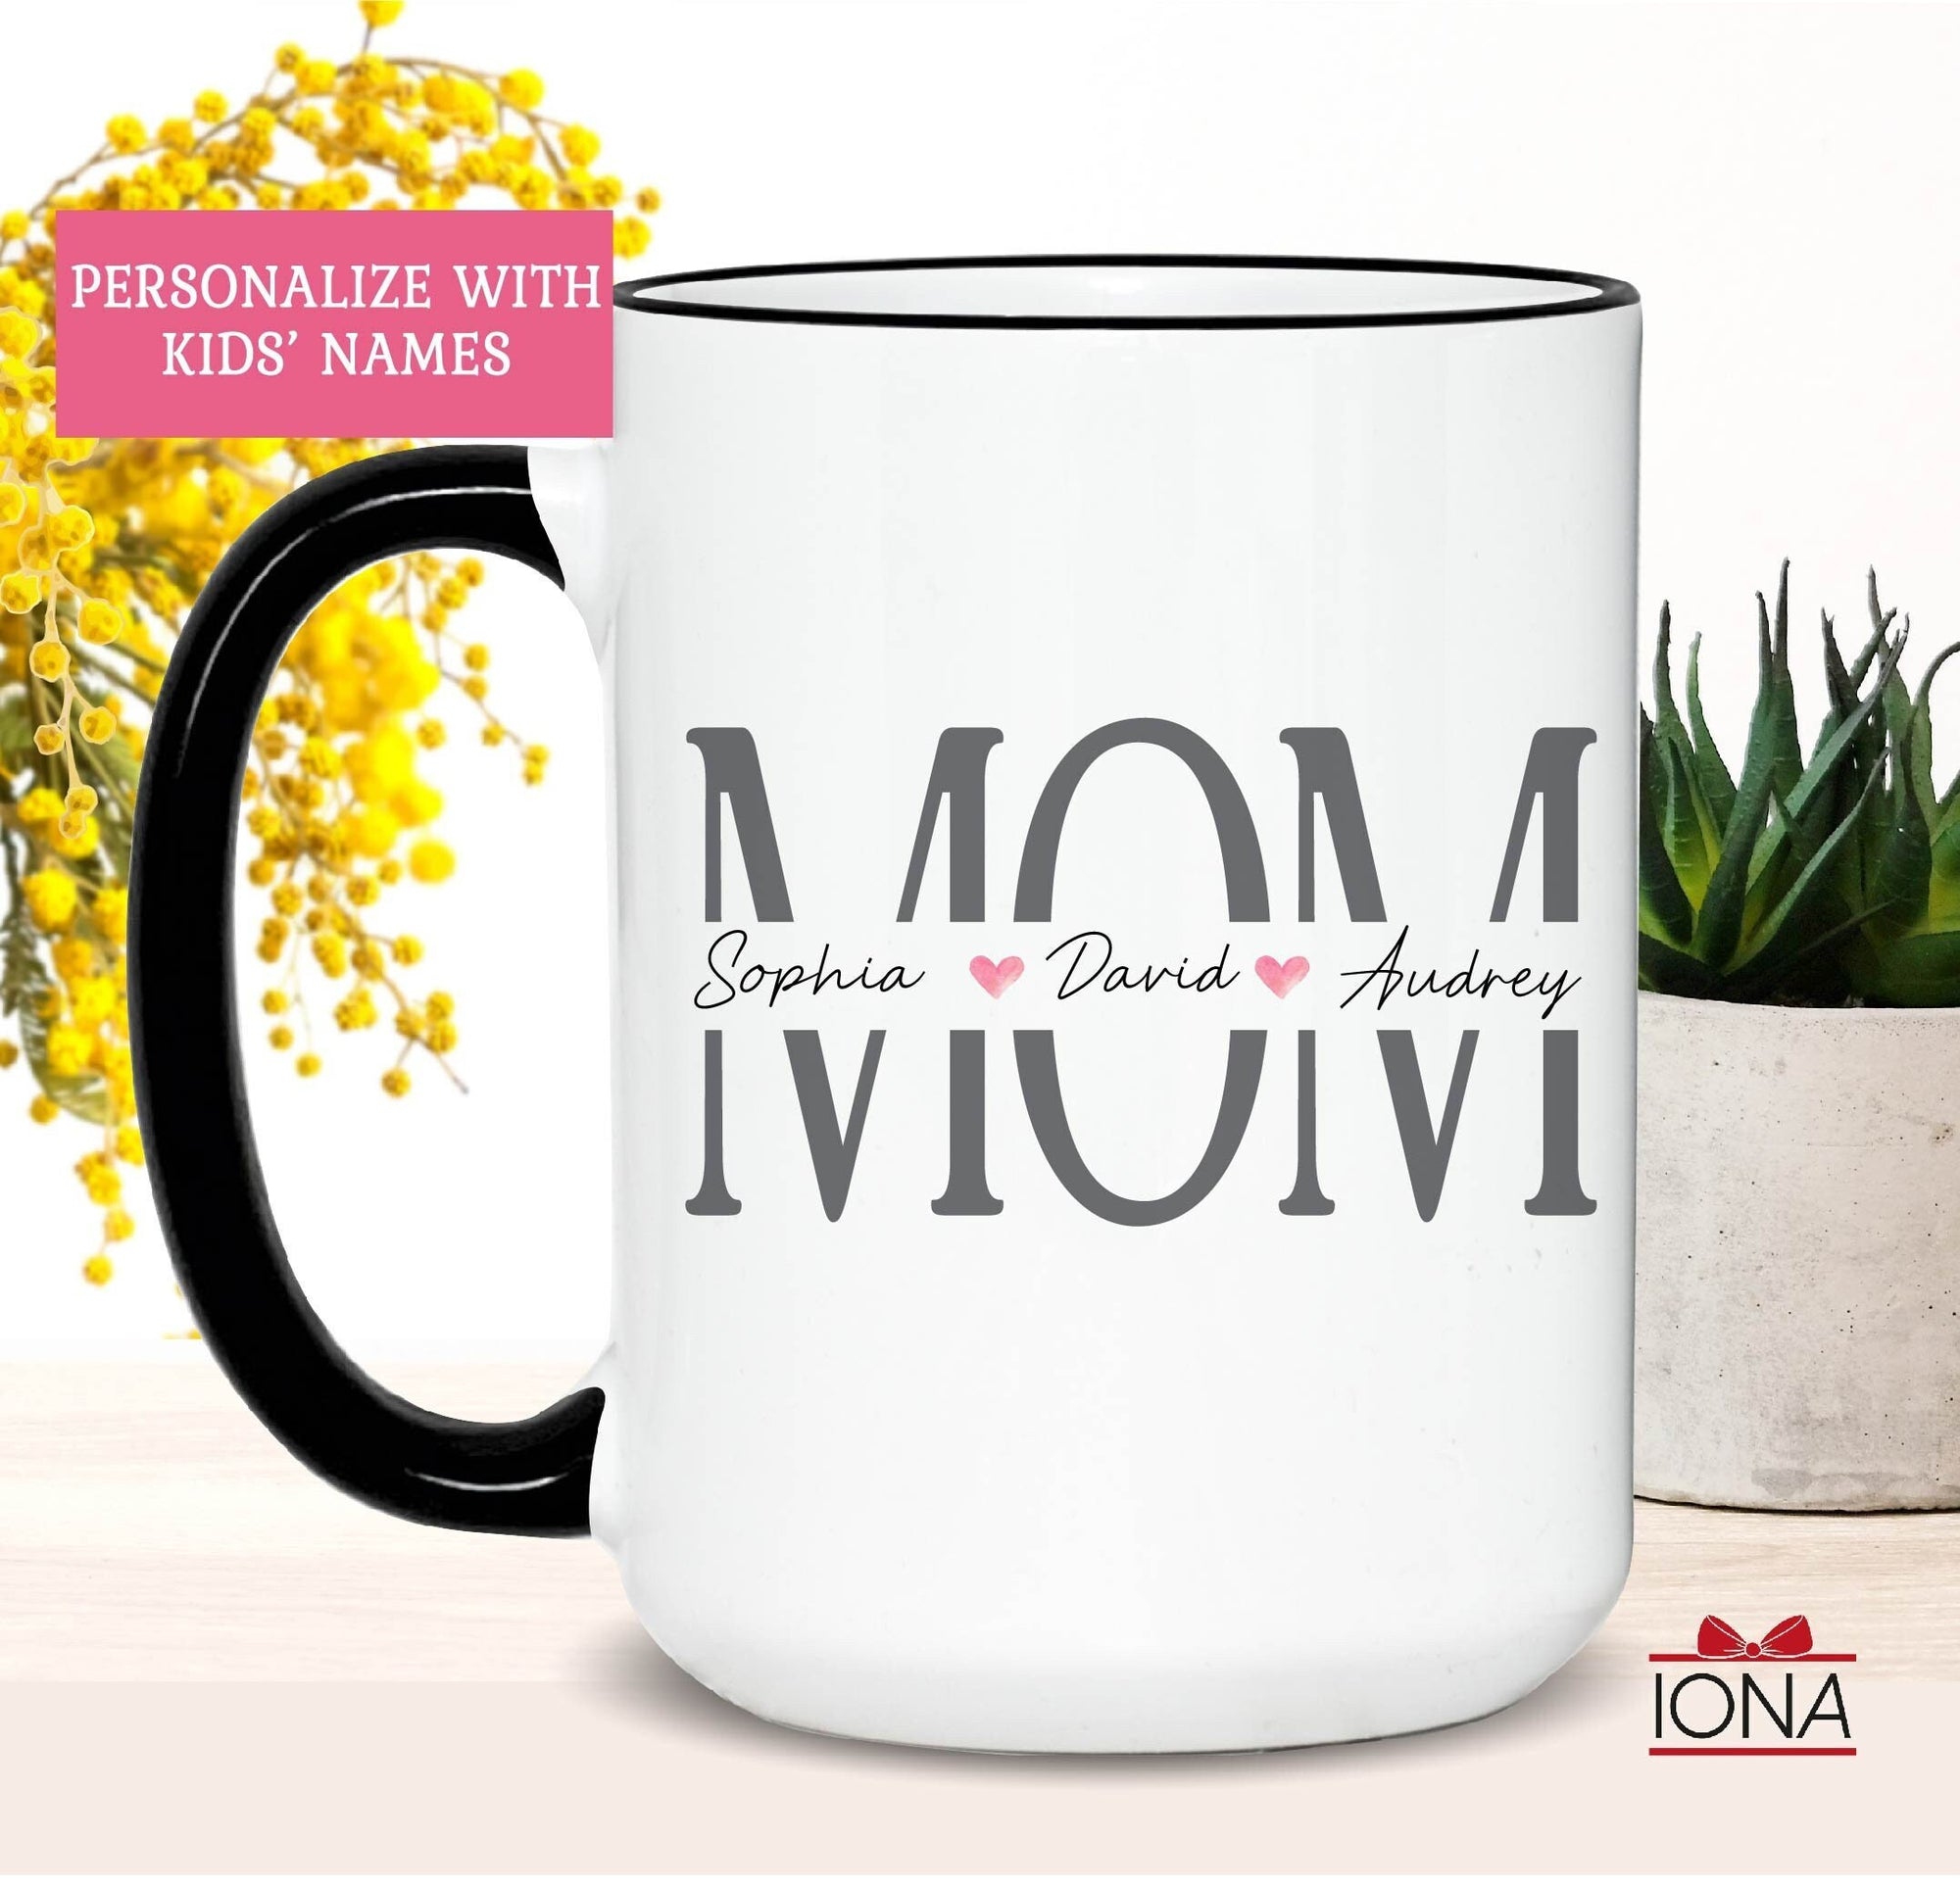 Personalized Mom Coffee Mug With Kids Names for Mom, Custom Mother's Day Gift, Mom Birthday Gift from Daughter, Son, Coffee Mug for Mom